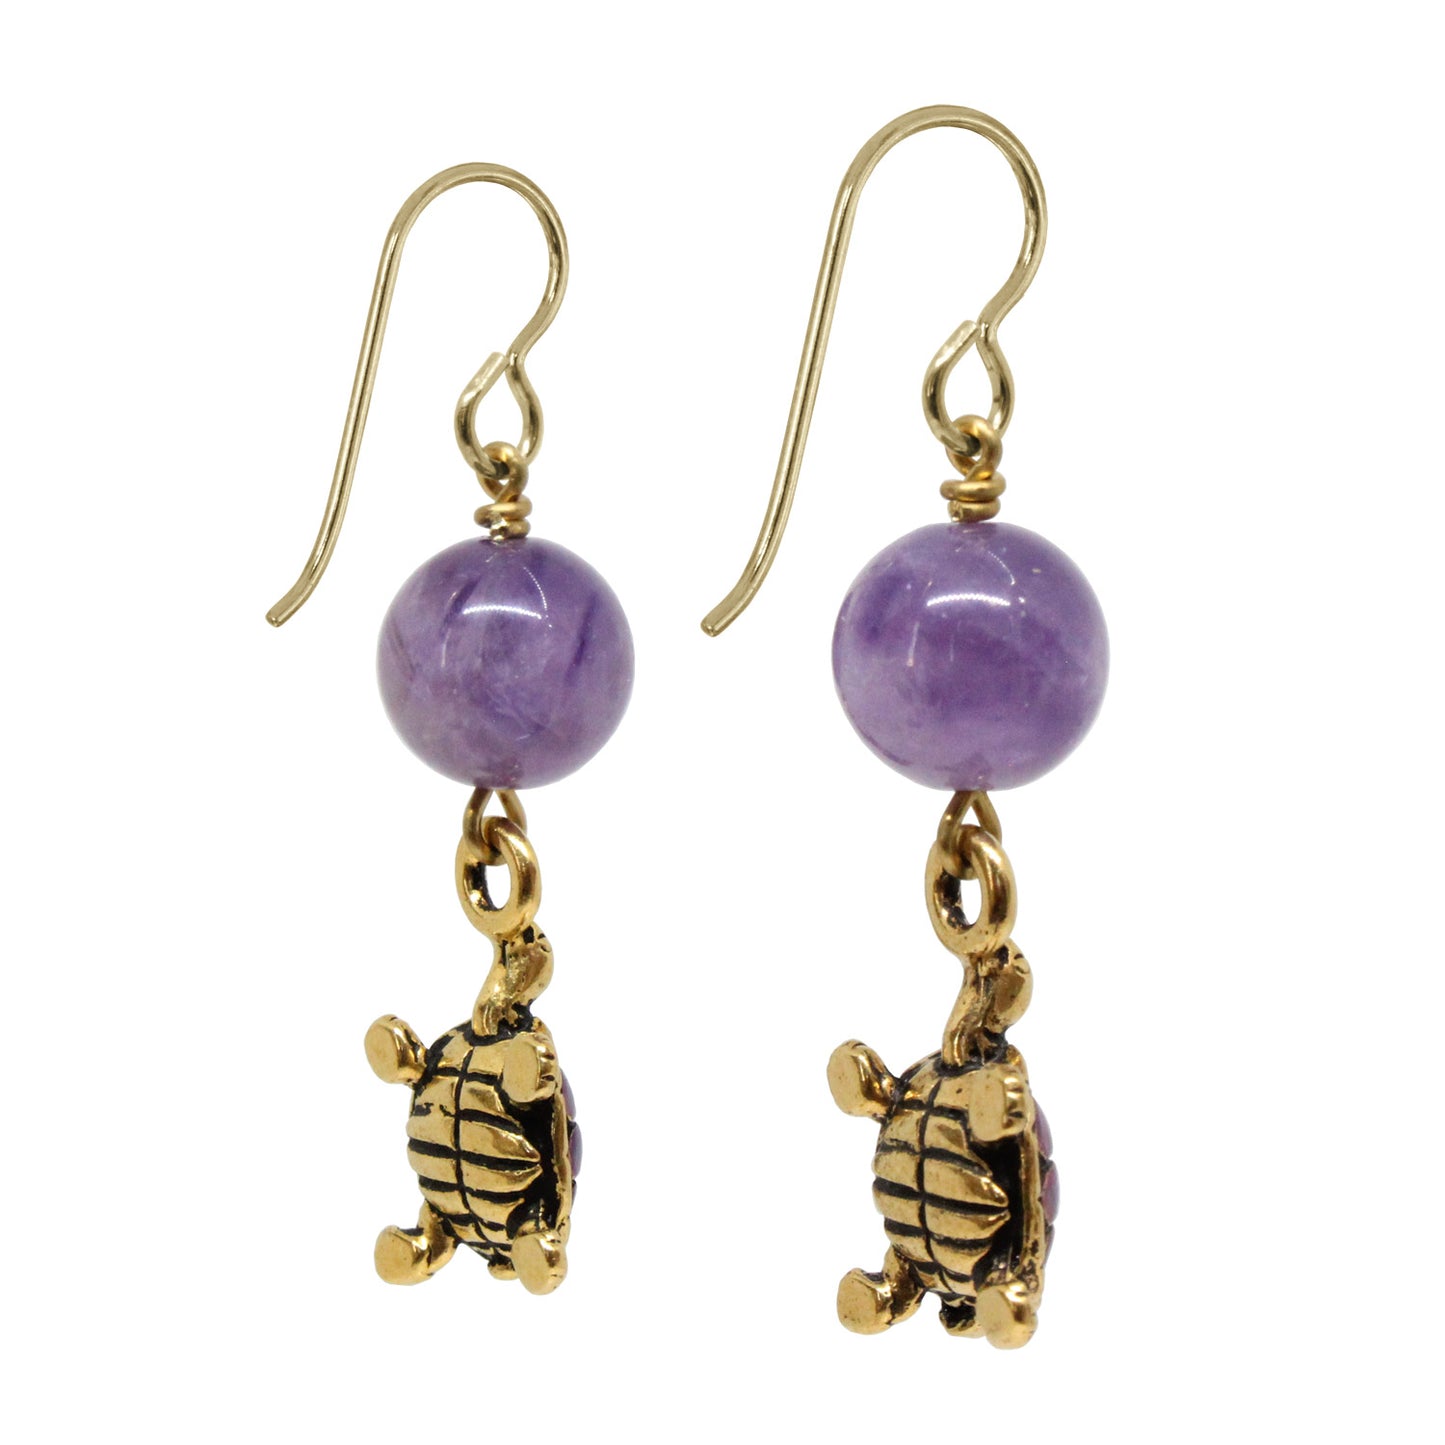 Turtle Earrings / 45mm length / hand painted pewter charms / purple amethyst / gold filled earwires